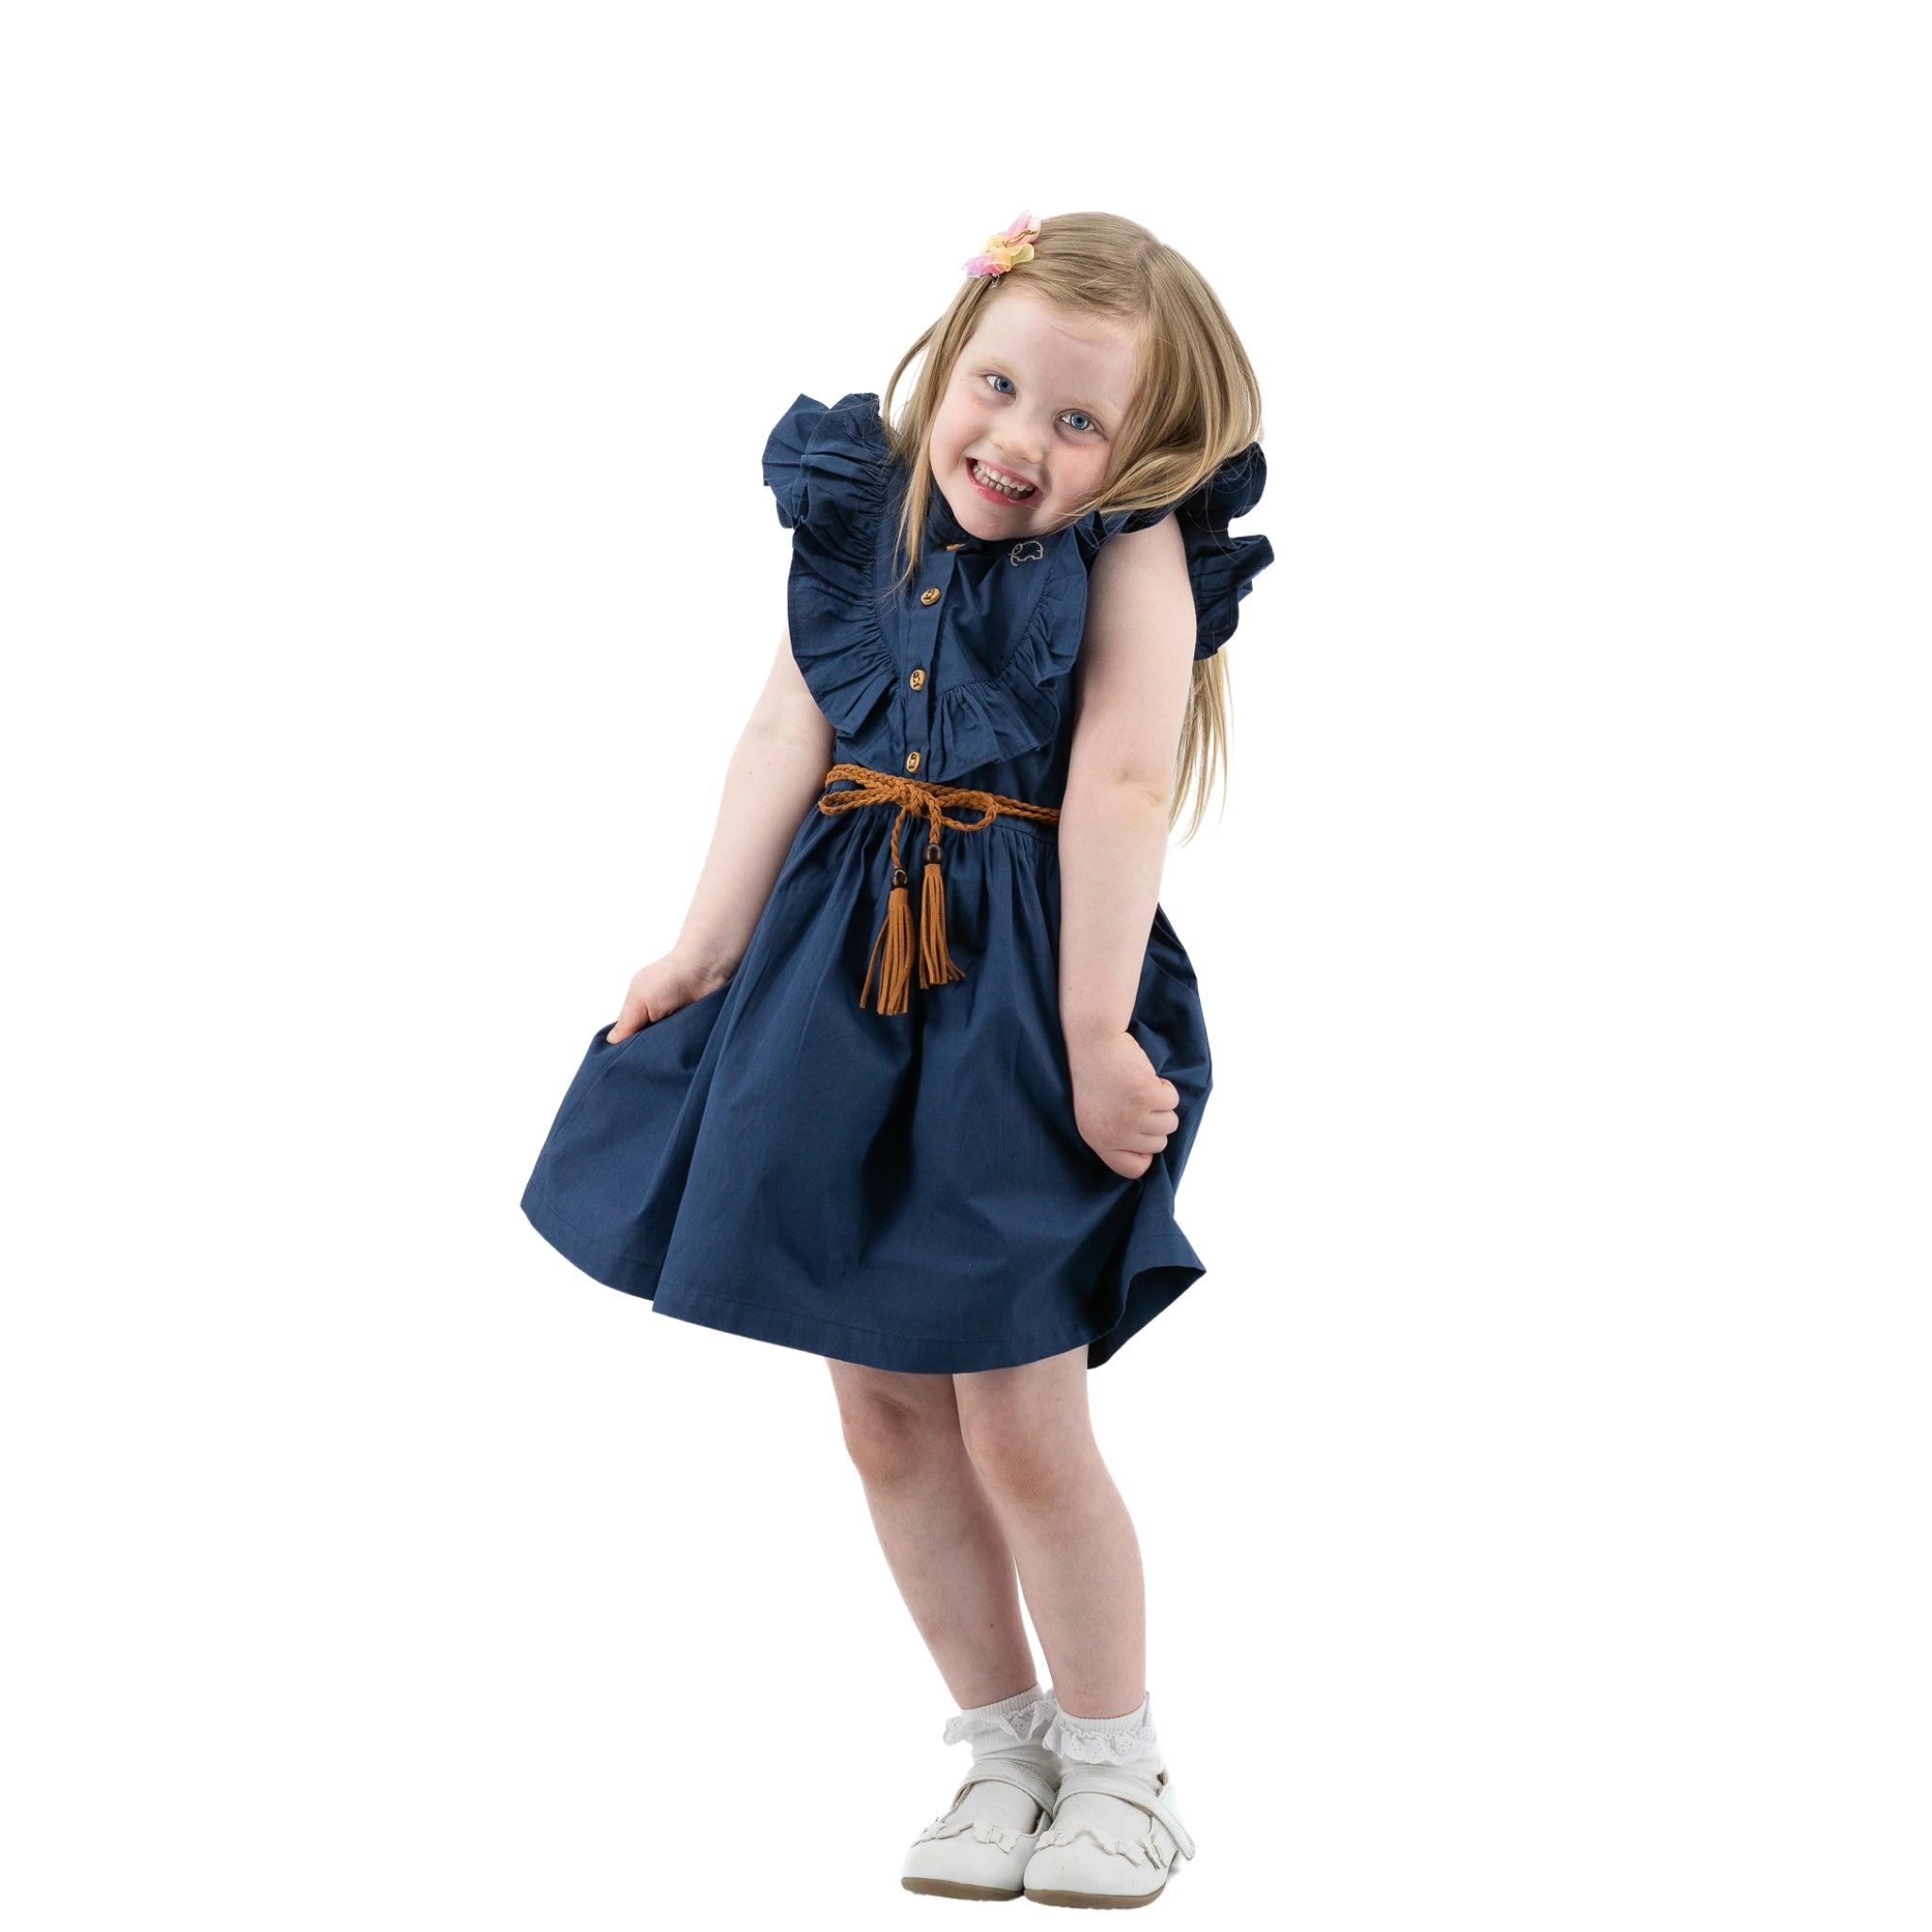 A young girl in a Karee navy blue butterfly sleeve cotton dress playfully tilting her head, holding her dress with one hand and standing isolated on a white background.